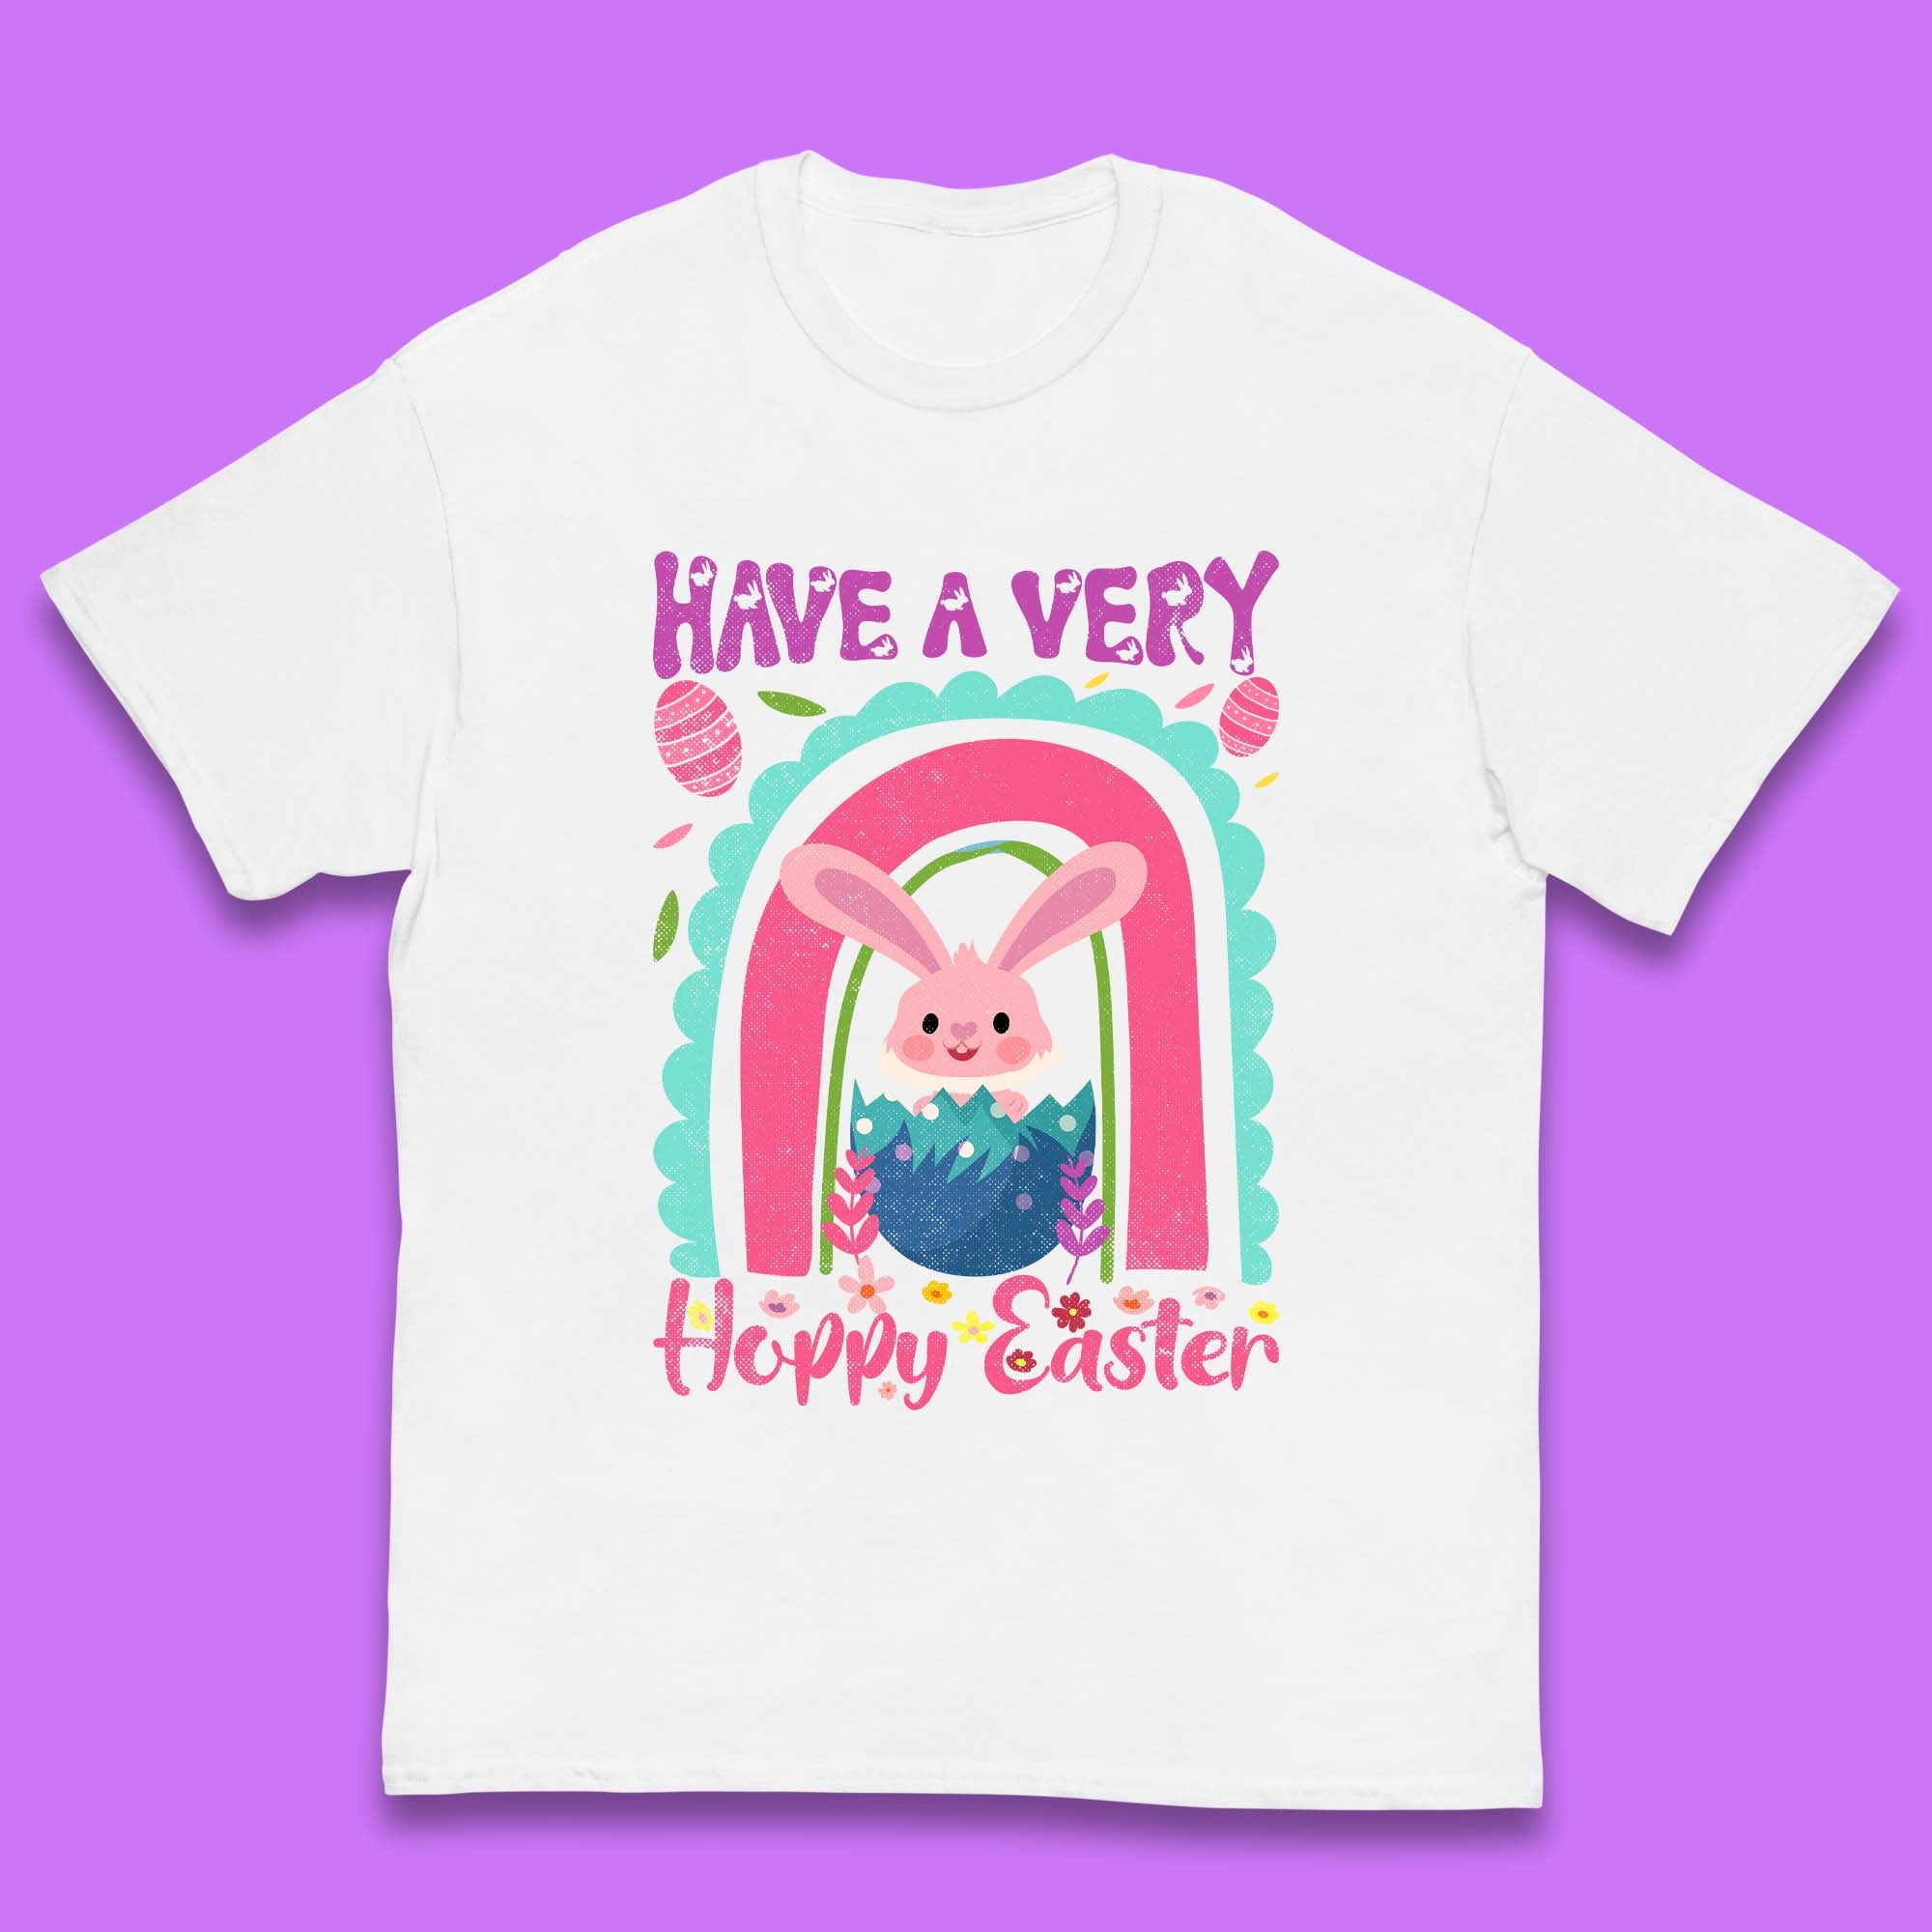 Have A Very Happy Easter Kids T-Shirt